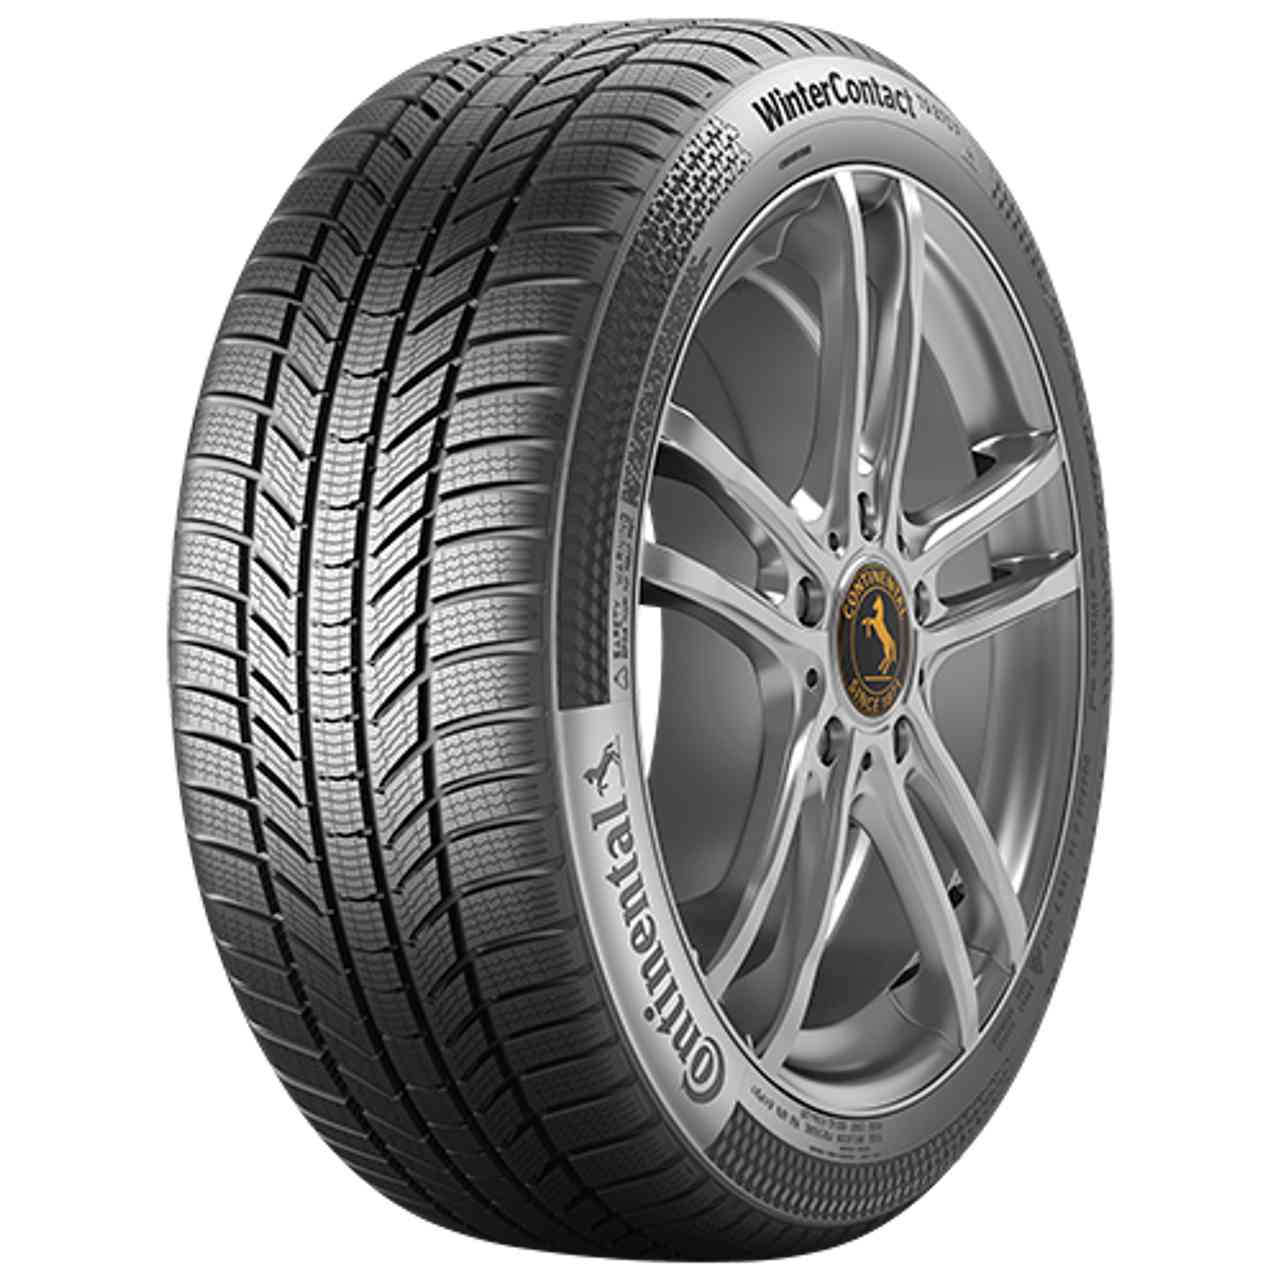 CONTINENTAL WINTERCONTACT TS 870 P (EVc) 215/70R16 100T FR BSW